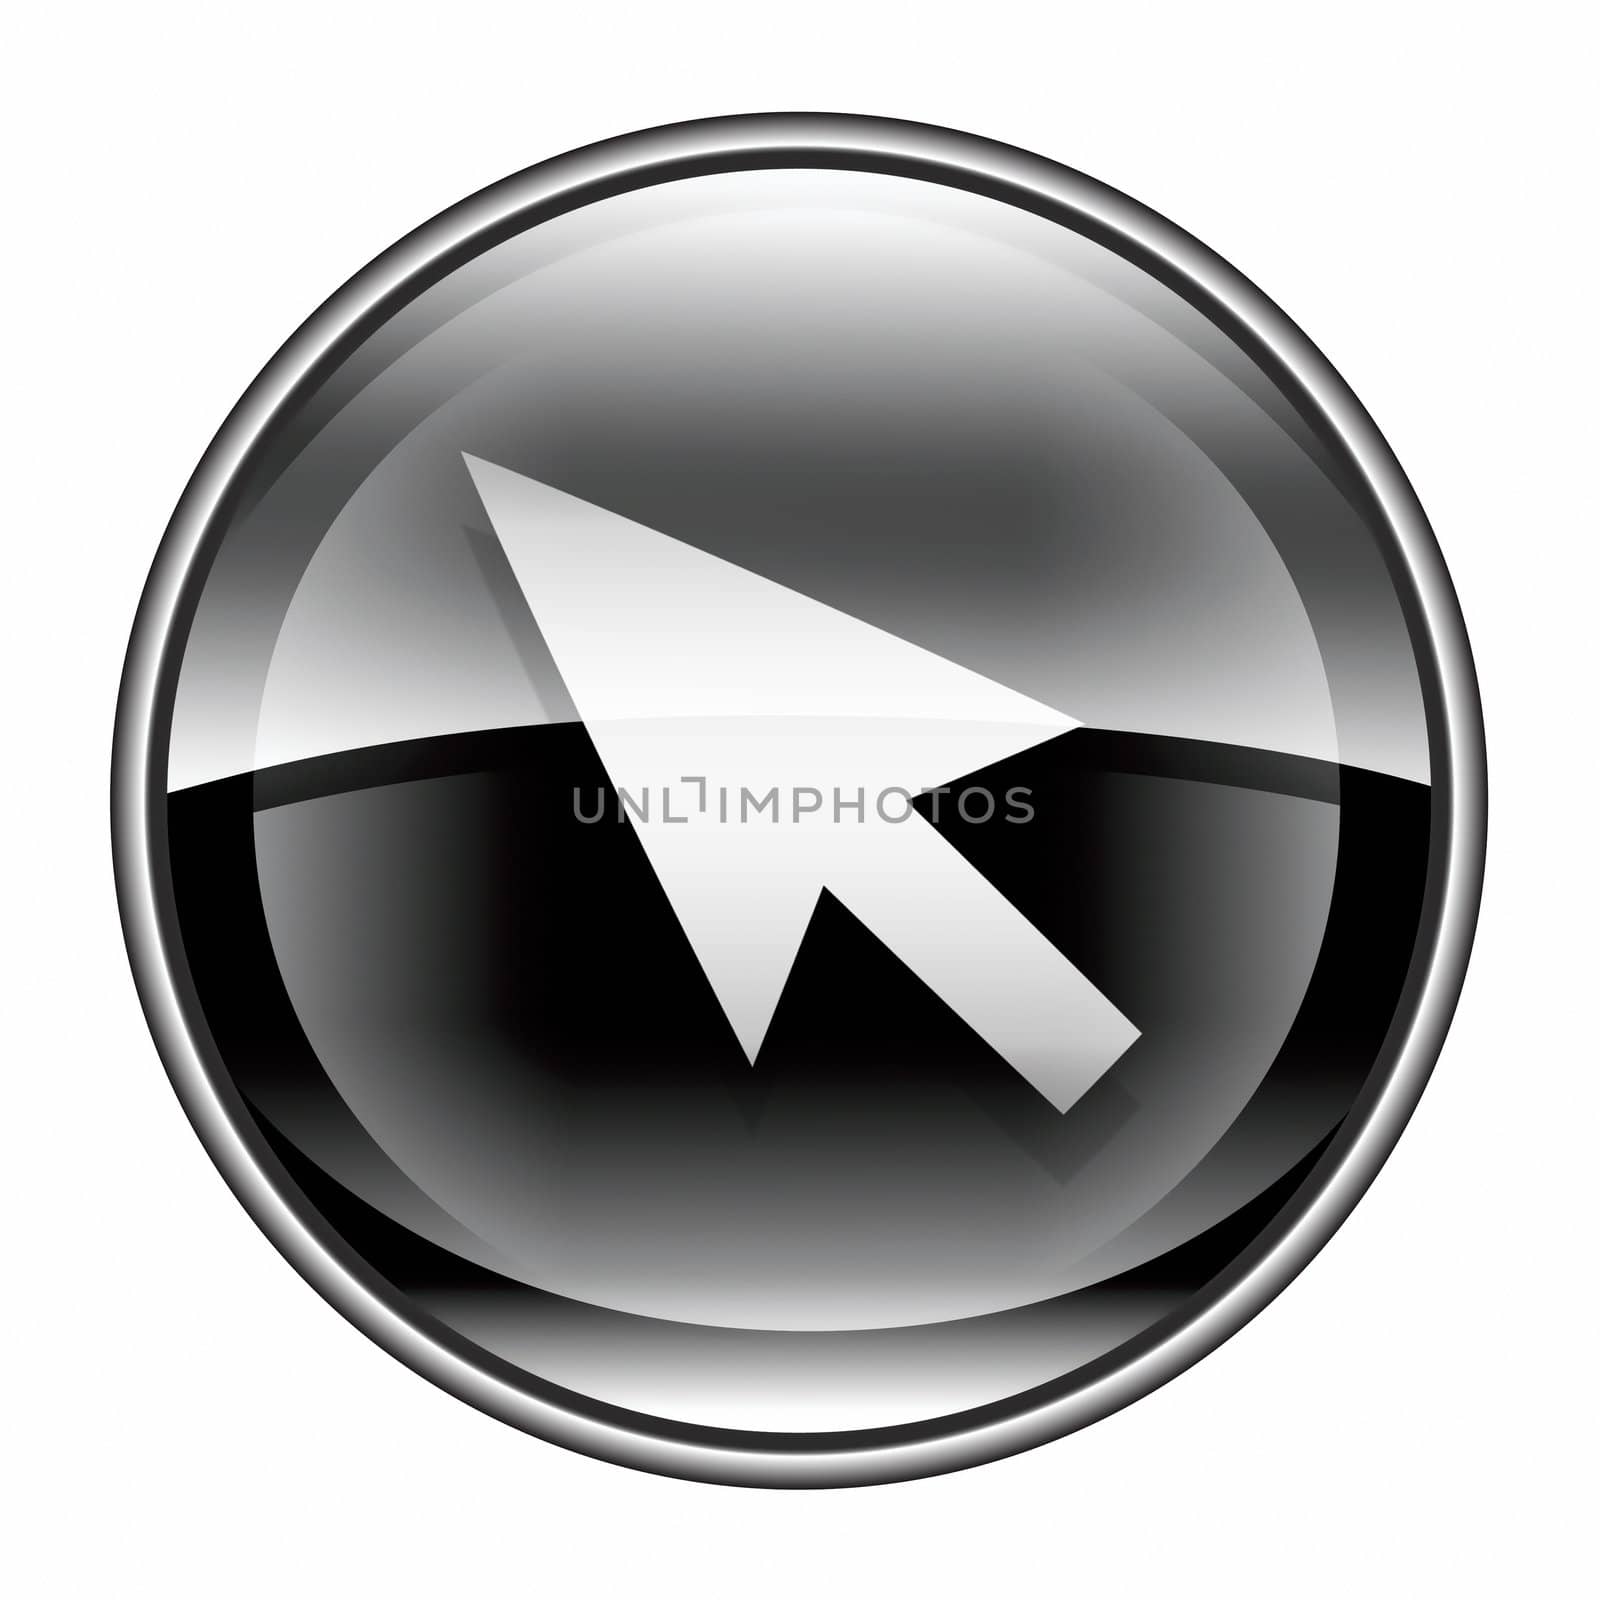 cursor icon black, isolated on white background by zeffss